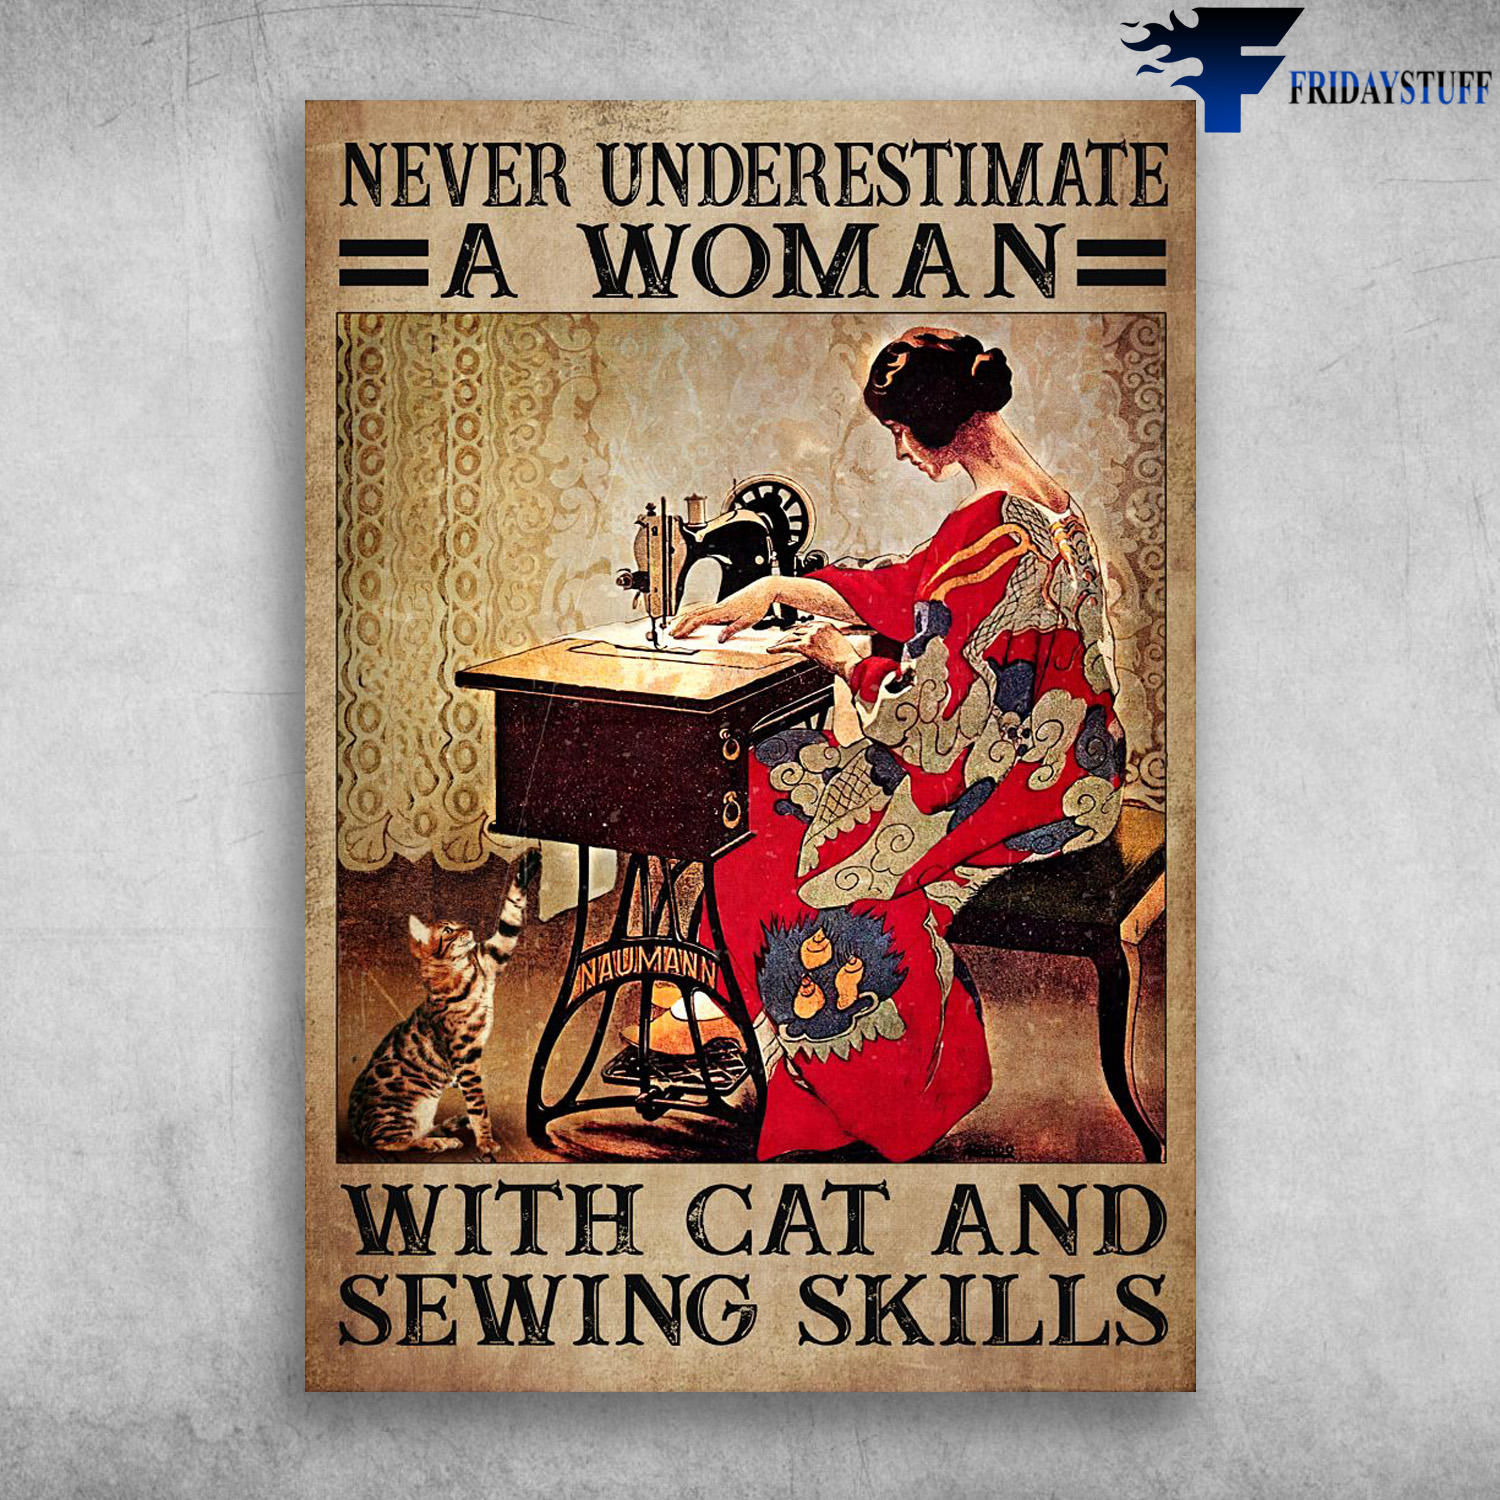 Lady Sewing, Cat - Never Underestimate A Woman, With Cat And Sewing Skills